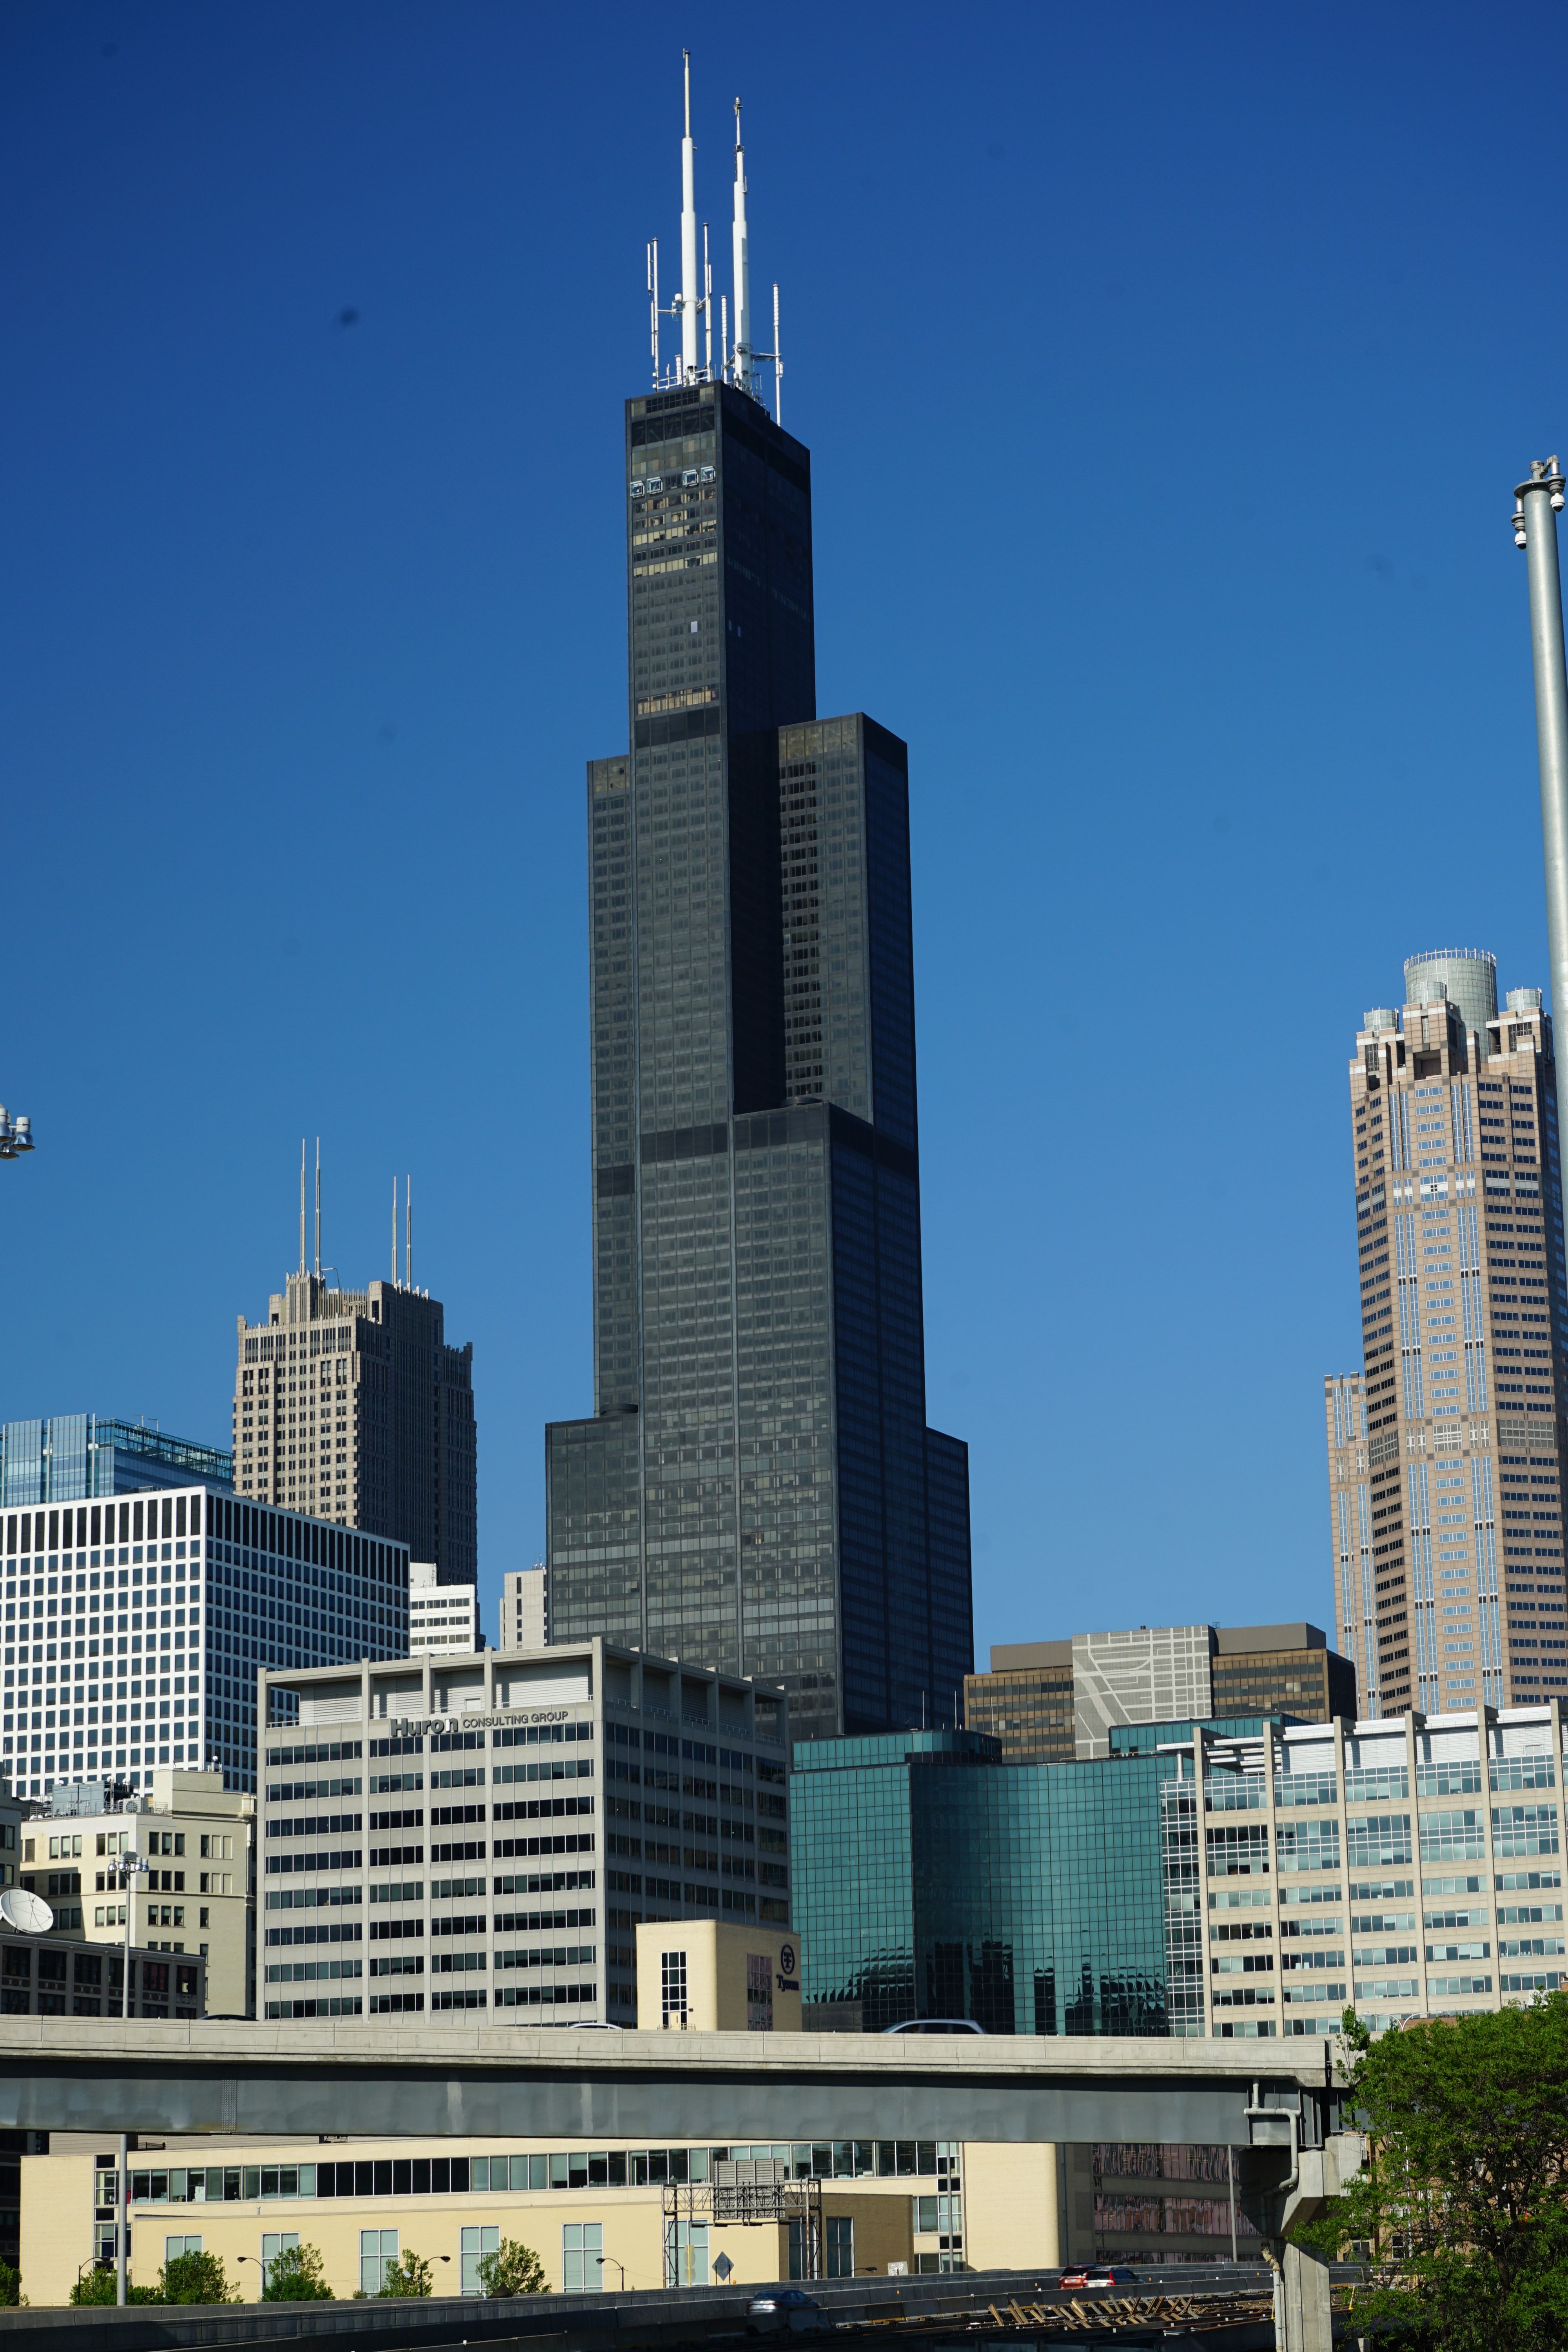 Wills Tower Sears Tower, Chicago Illinois, United States